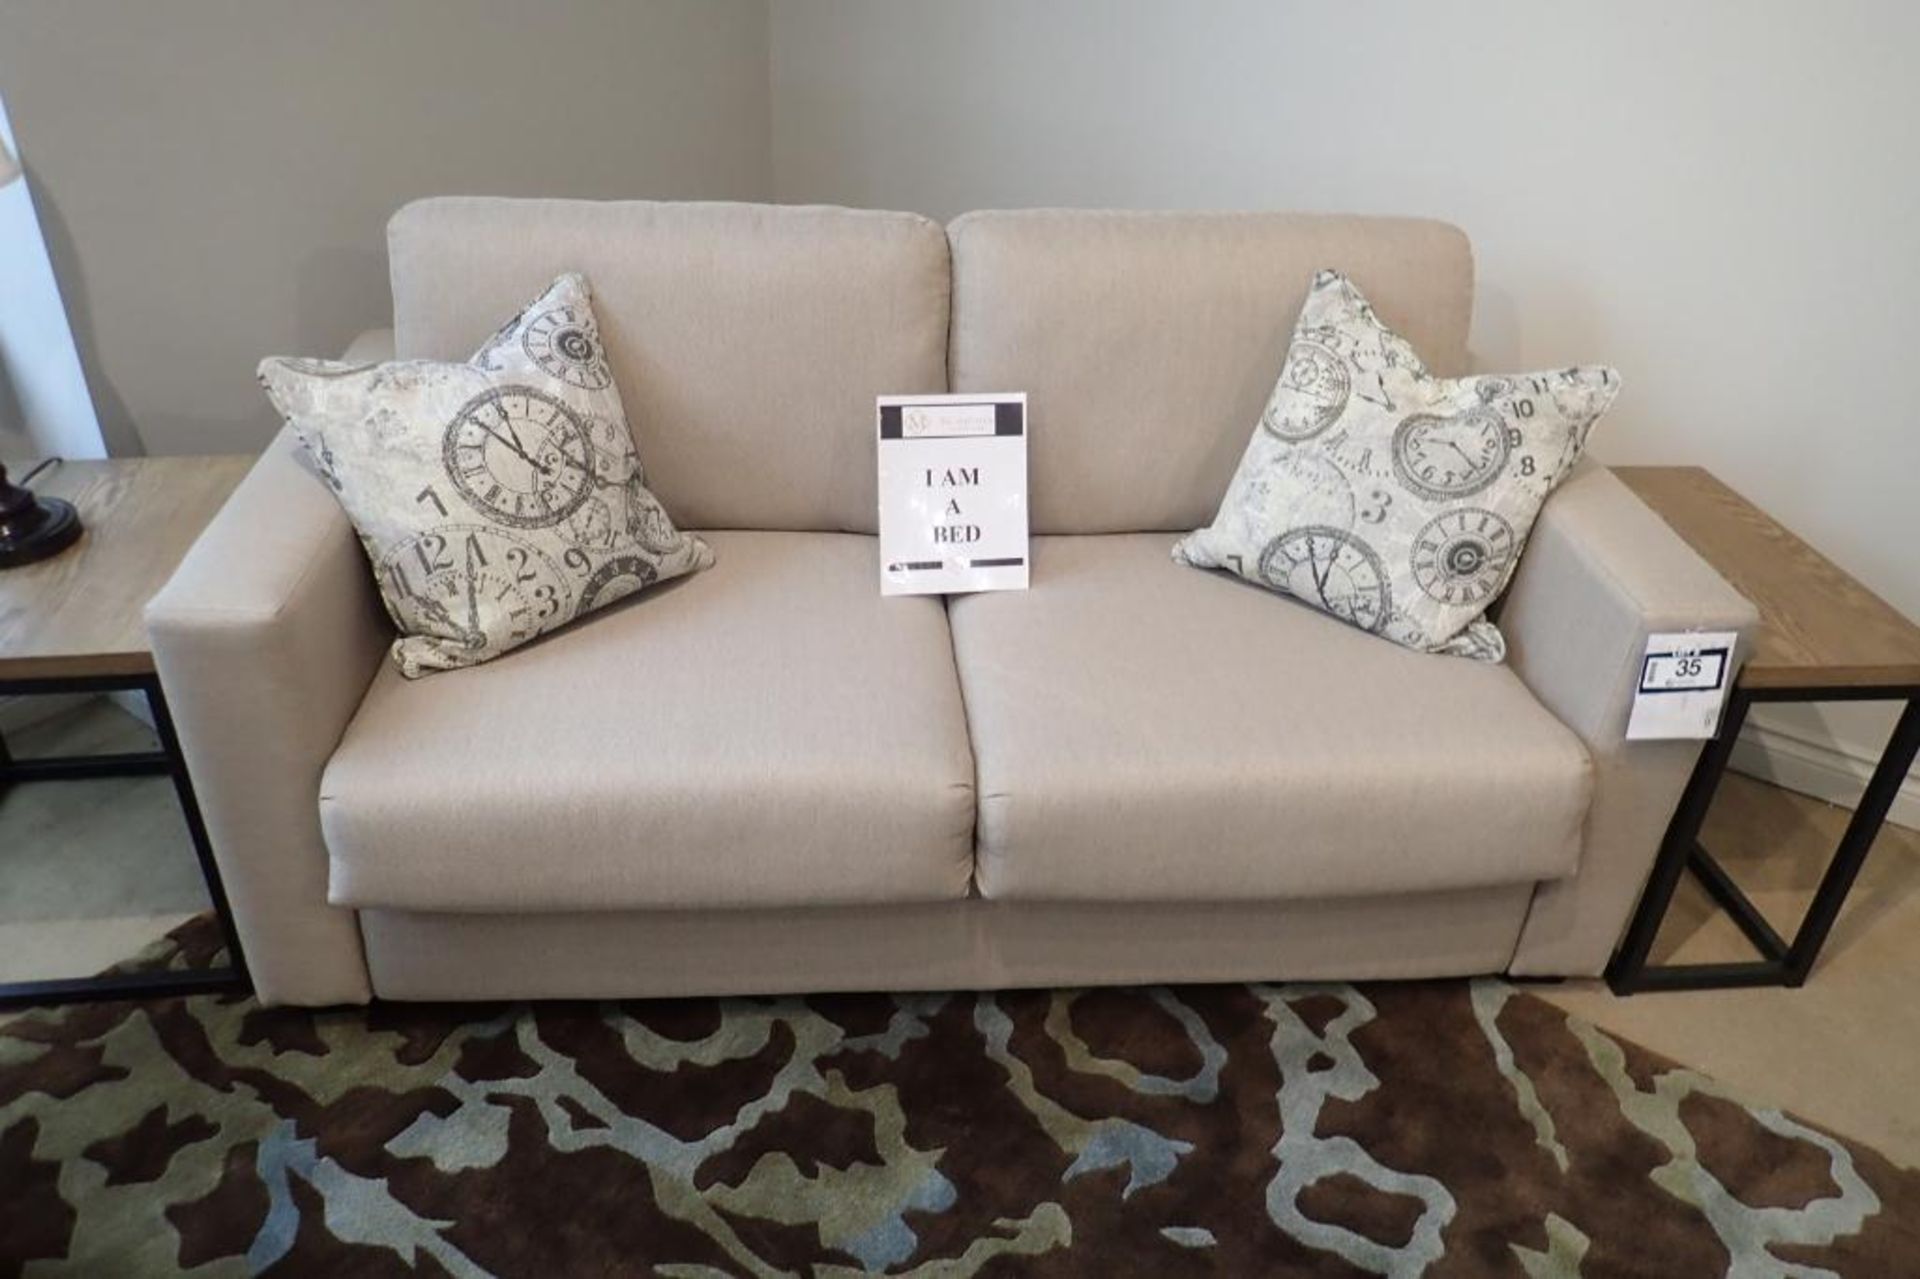 Lot of Decor-Rest 2T Double Bed 6' Sofa, Recliner Arm Chair and (2) 20"Sq Throw Pillows. - Image 2 of 7